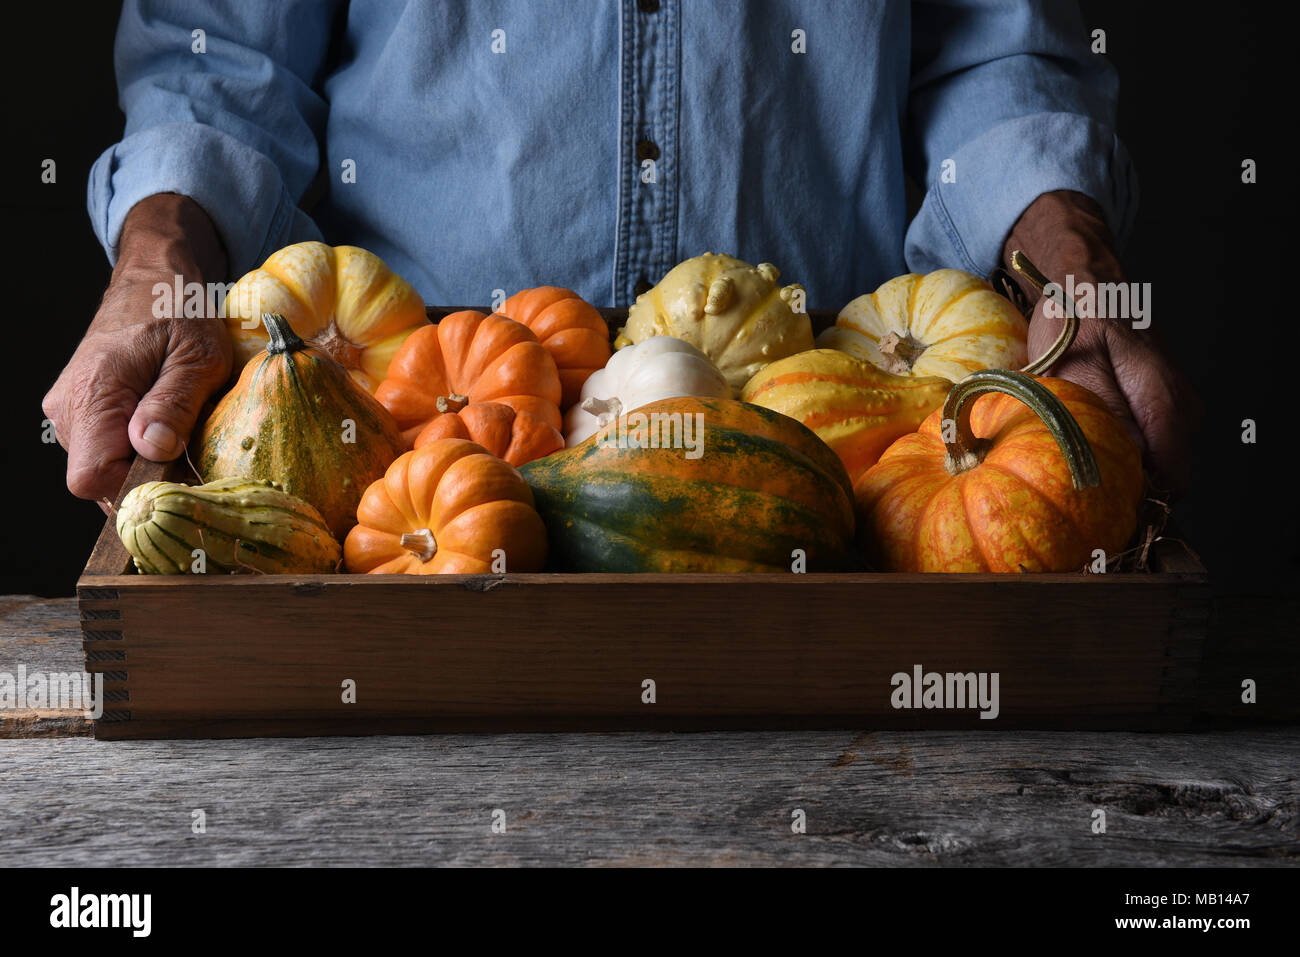 Farmer at his stand holding a wood crate of Autumn vegetables and decorative gourds and pumpkins. Stock Photo